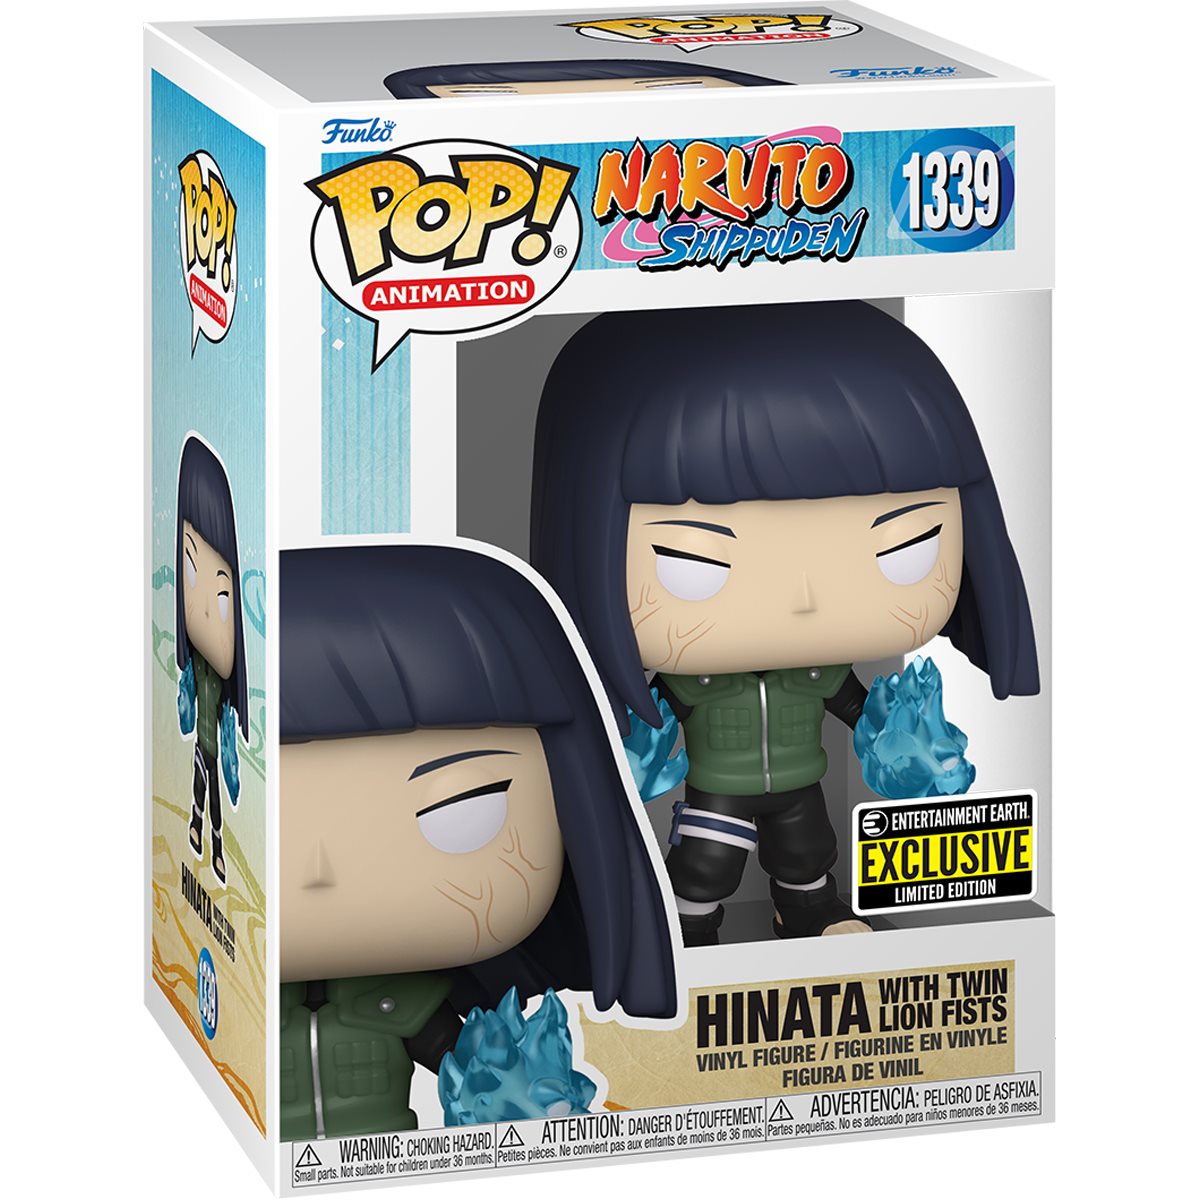 Pop! Naruto Shippuden Hinata with Twin Lion Fists #1339 Entertainment Earth Exclusive